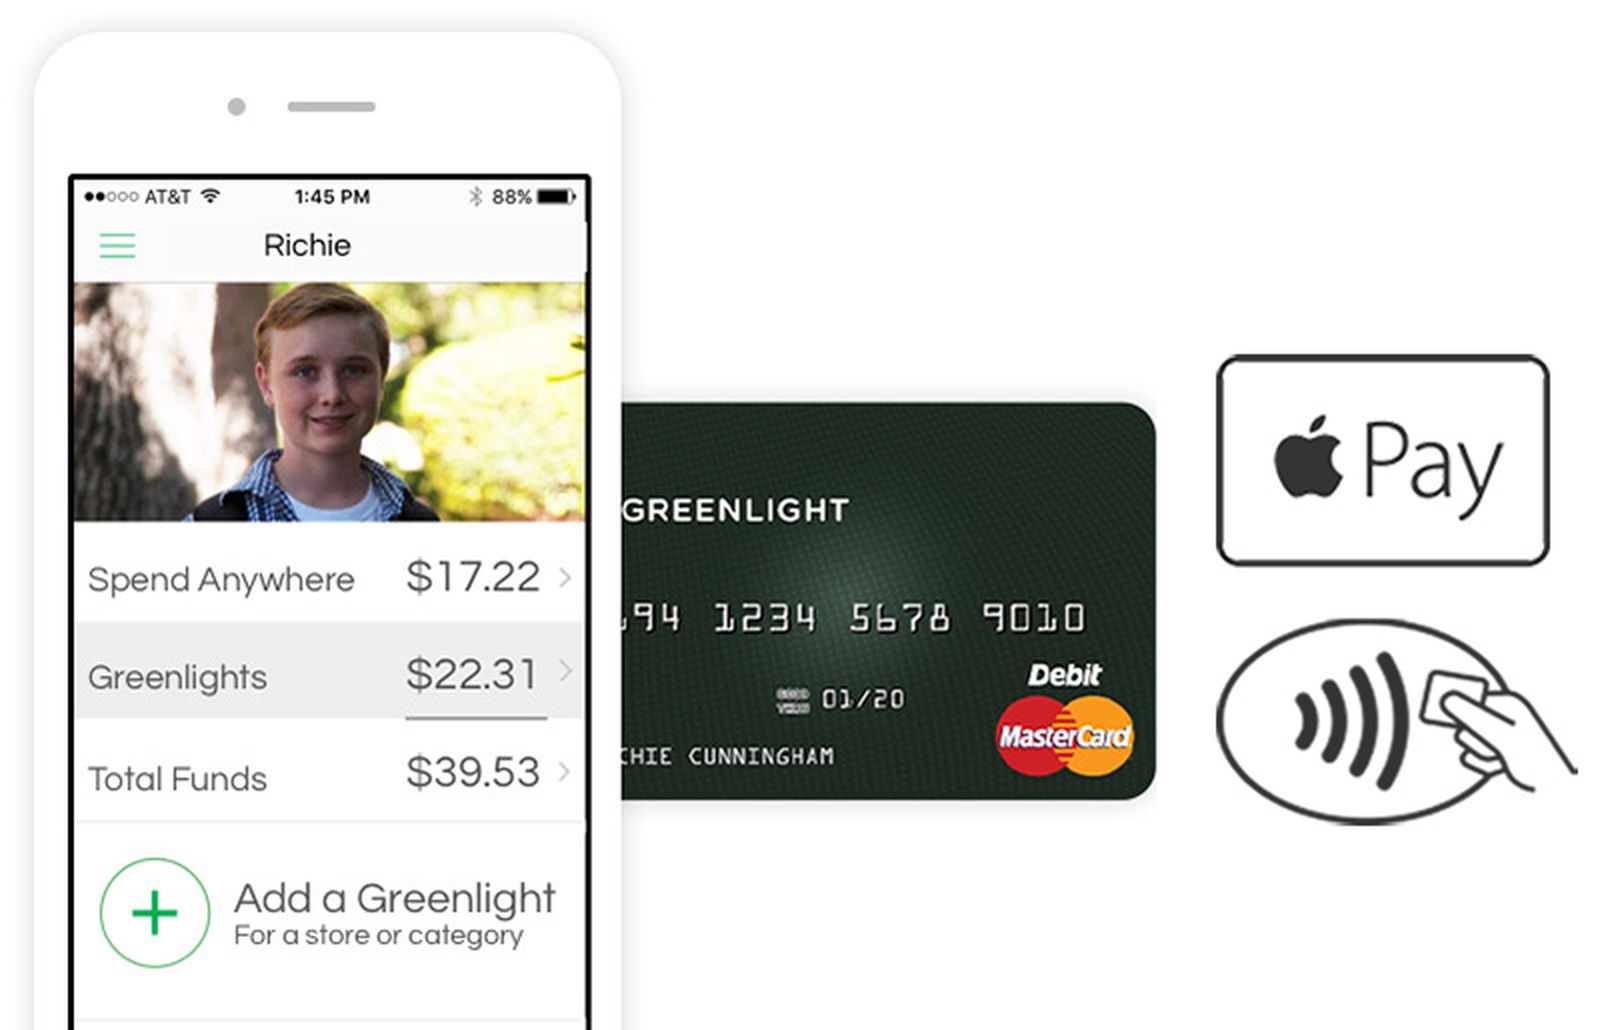 when did greenlight debit card come out